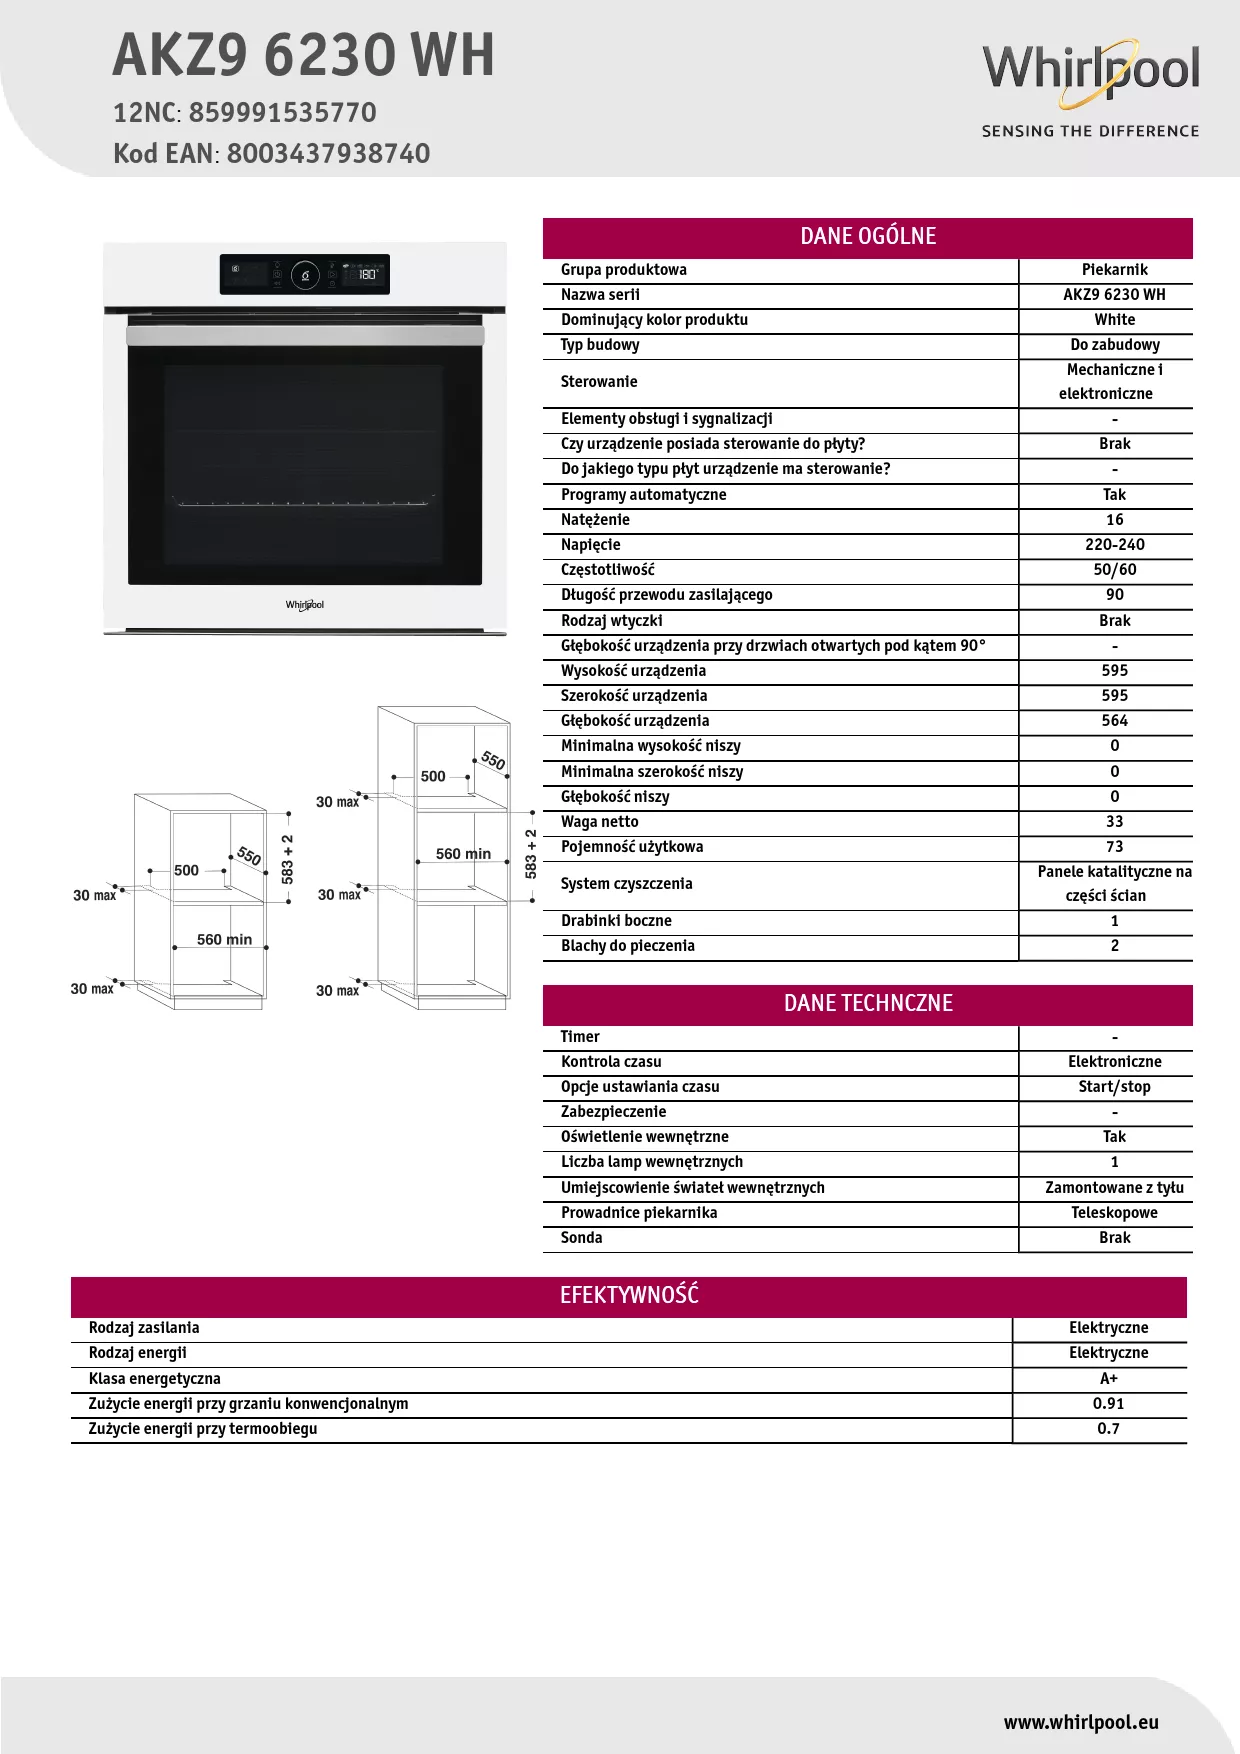 Mode d'emploi WHIRLPOOL AKZ9 6230 WH